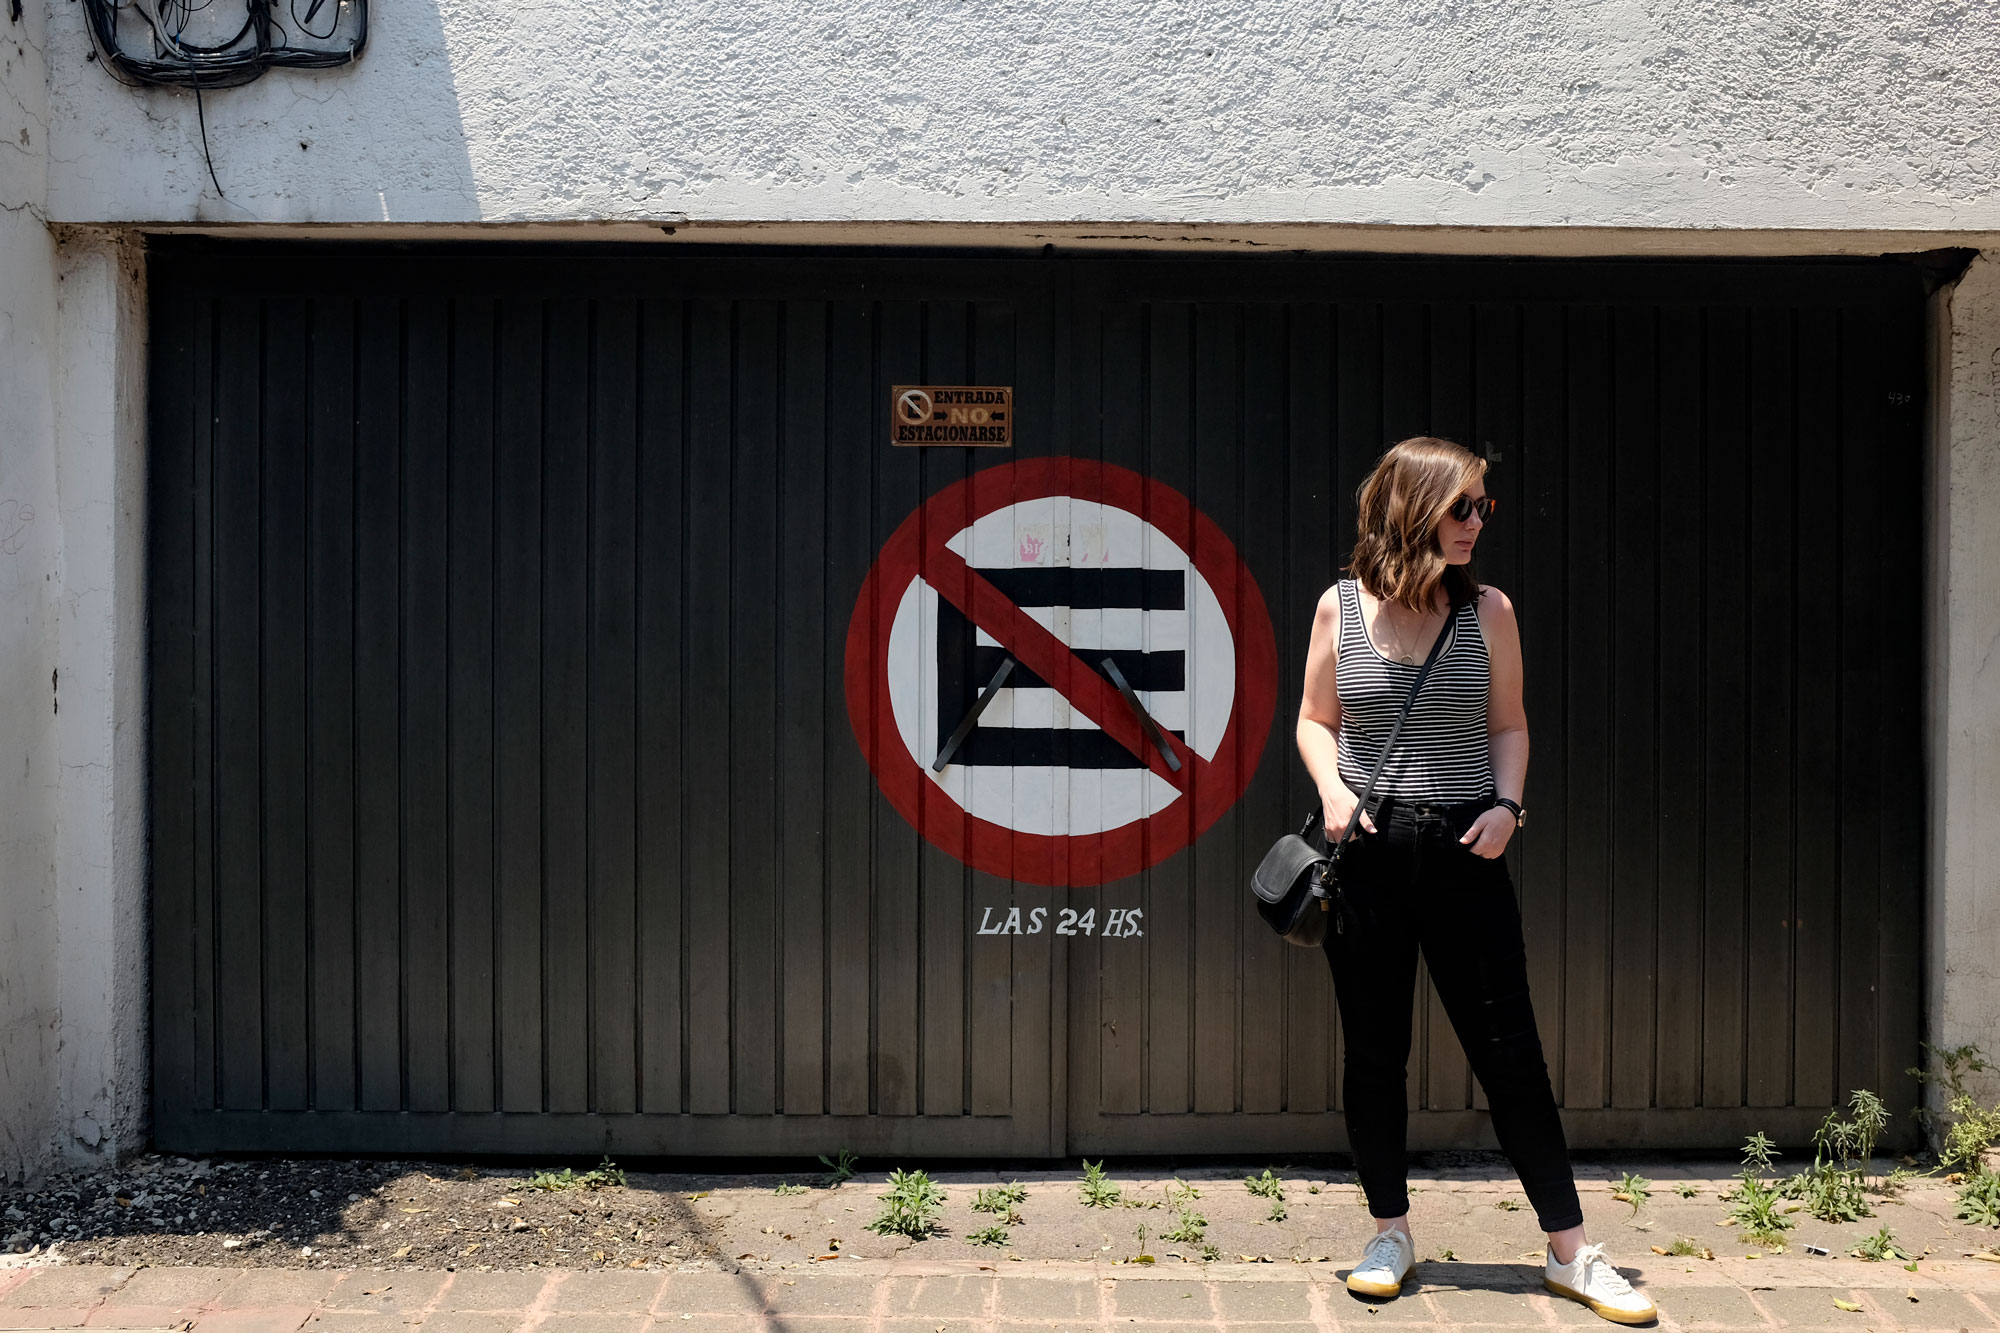 Alyssa standing in front of a sign that says no parking in spanish wearing black and white tank, black jeans, and white sneakers